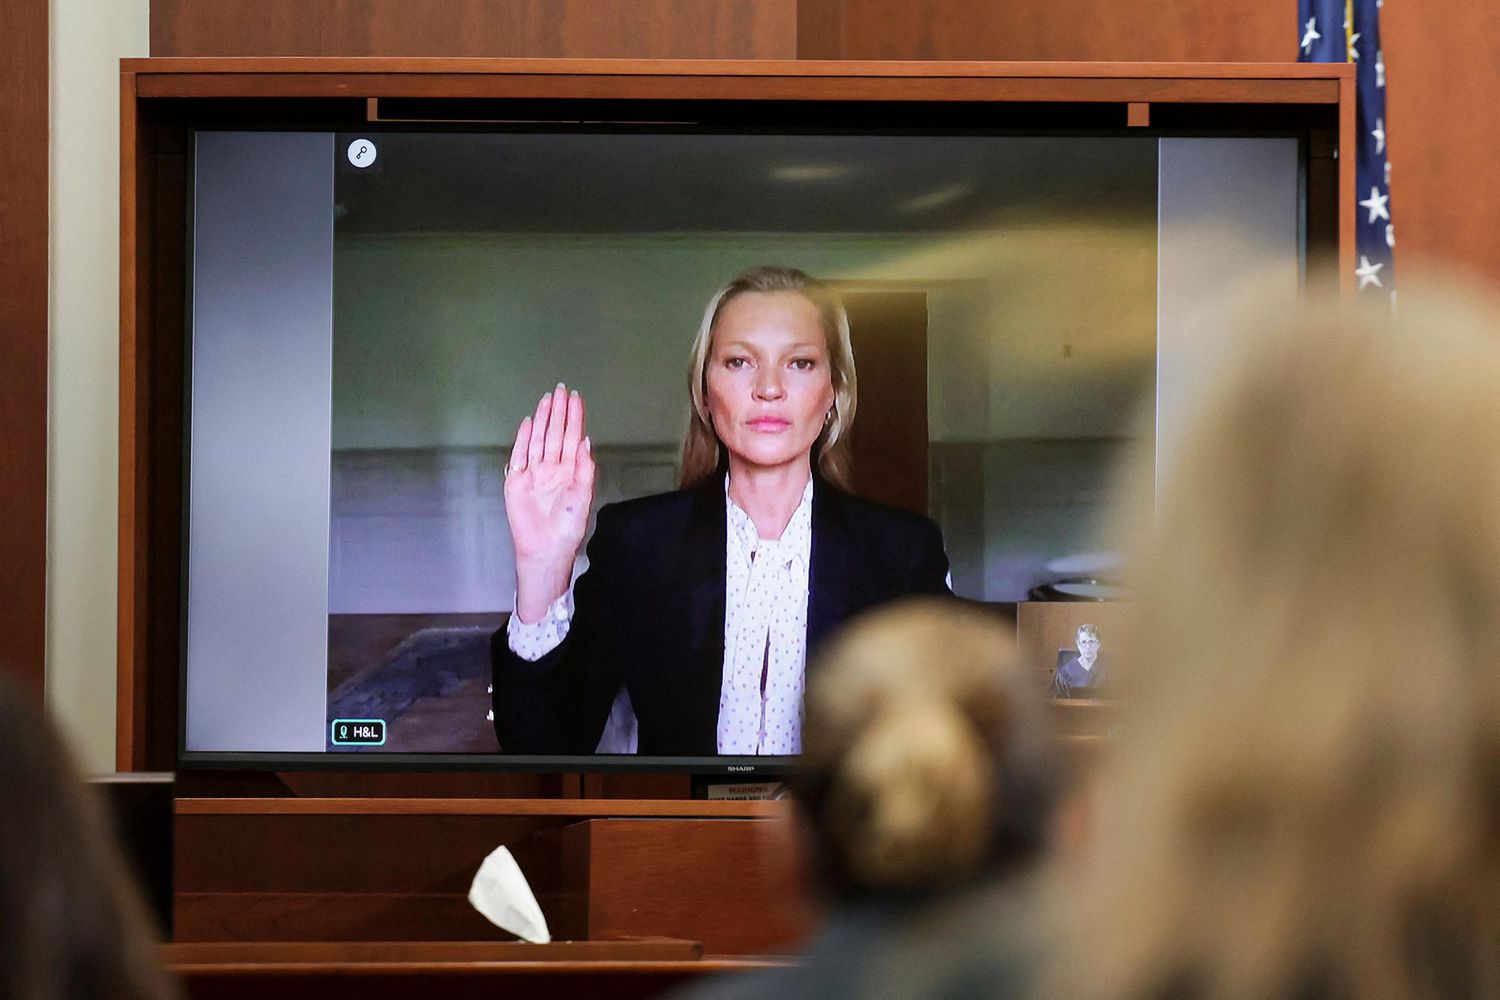 Model Kate Moss is sworn in via video link at the Fairfax County Circuit Courthouse in Fairfax, Virginia, on May 25, 2022.